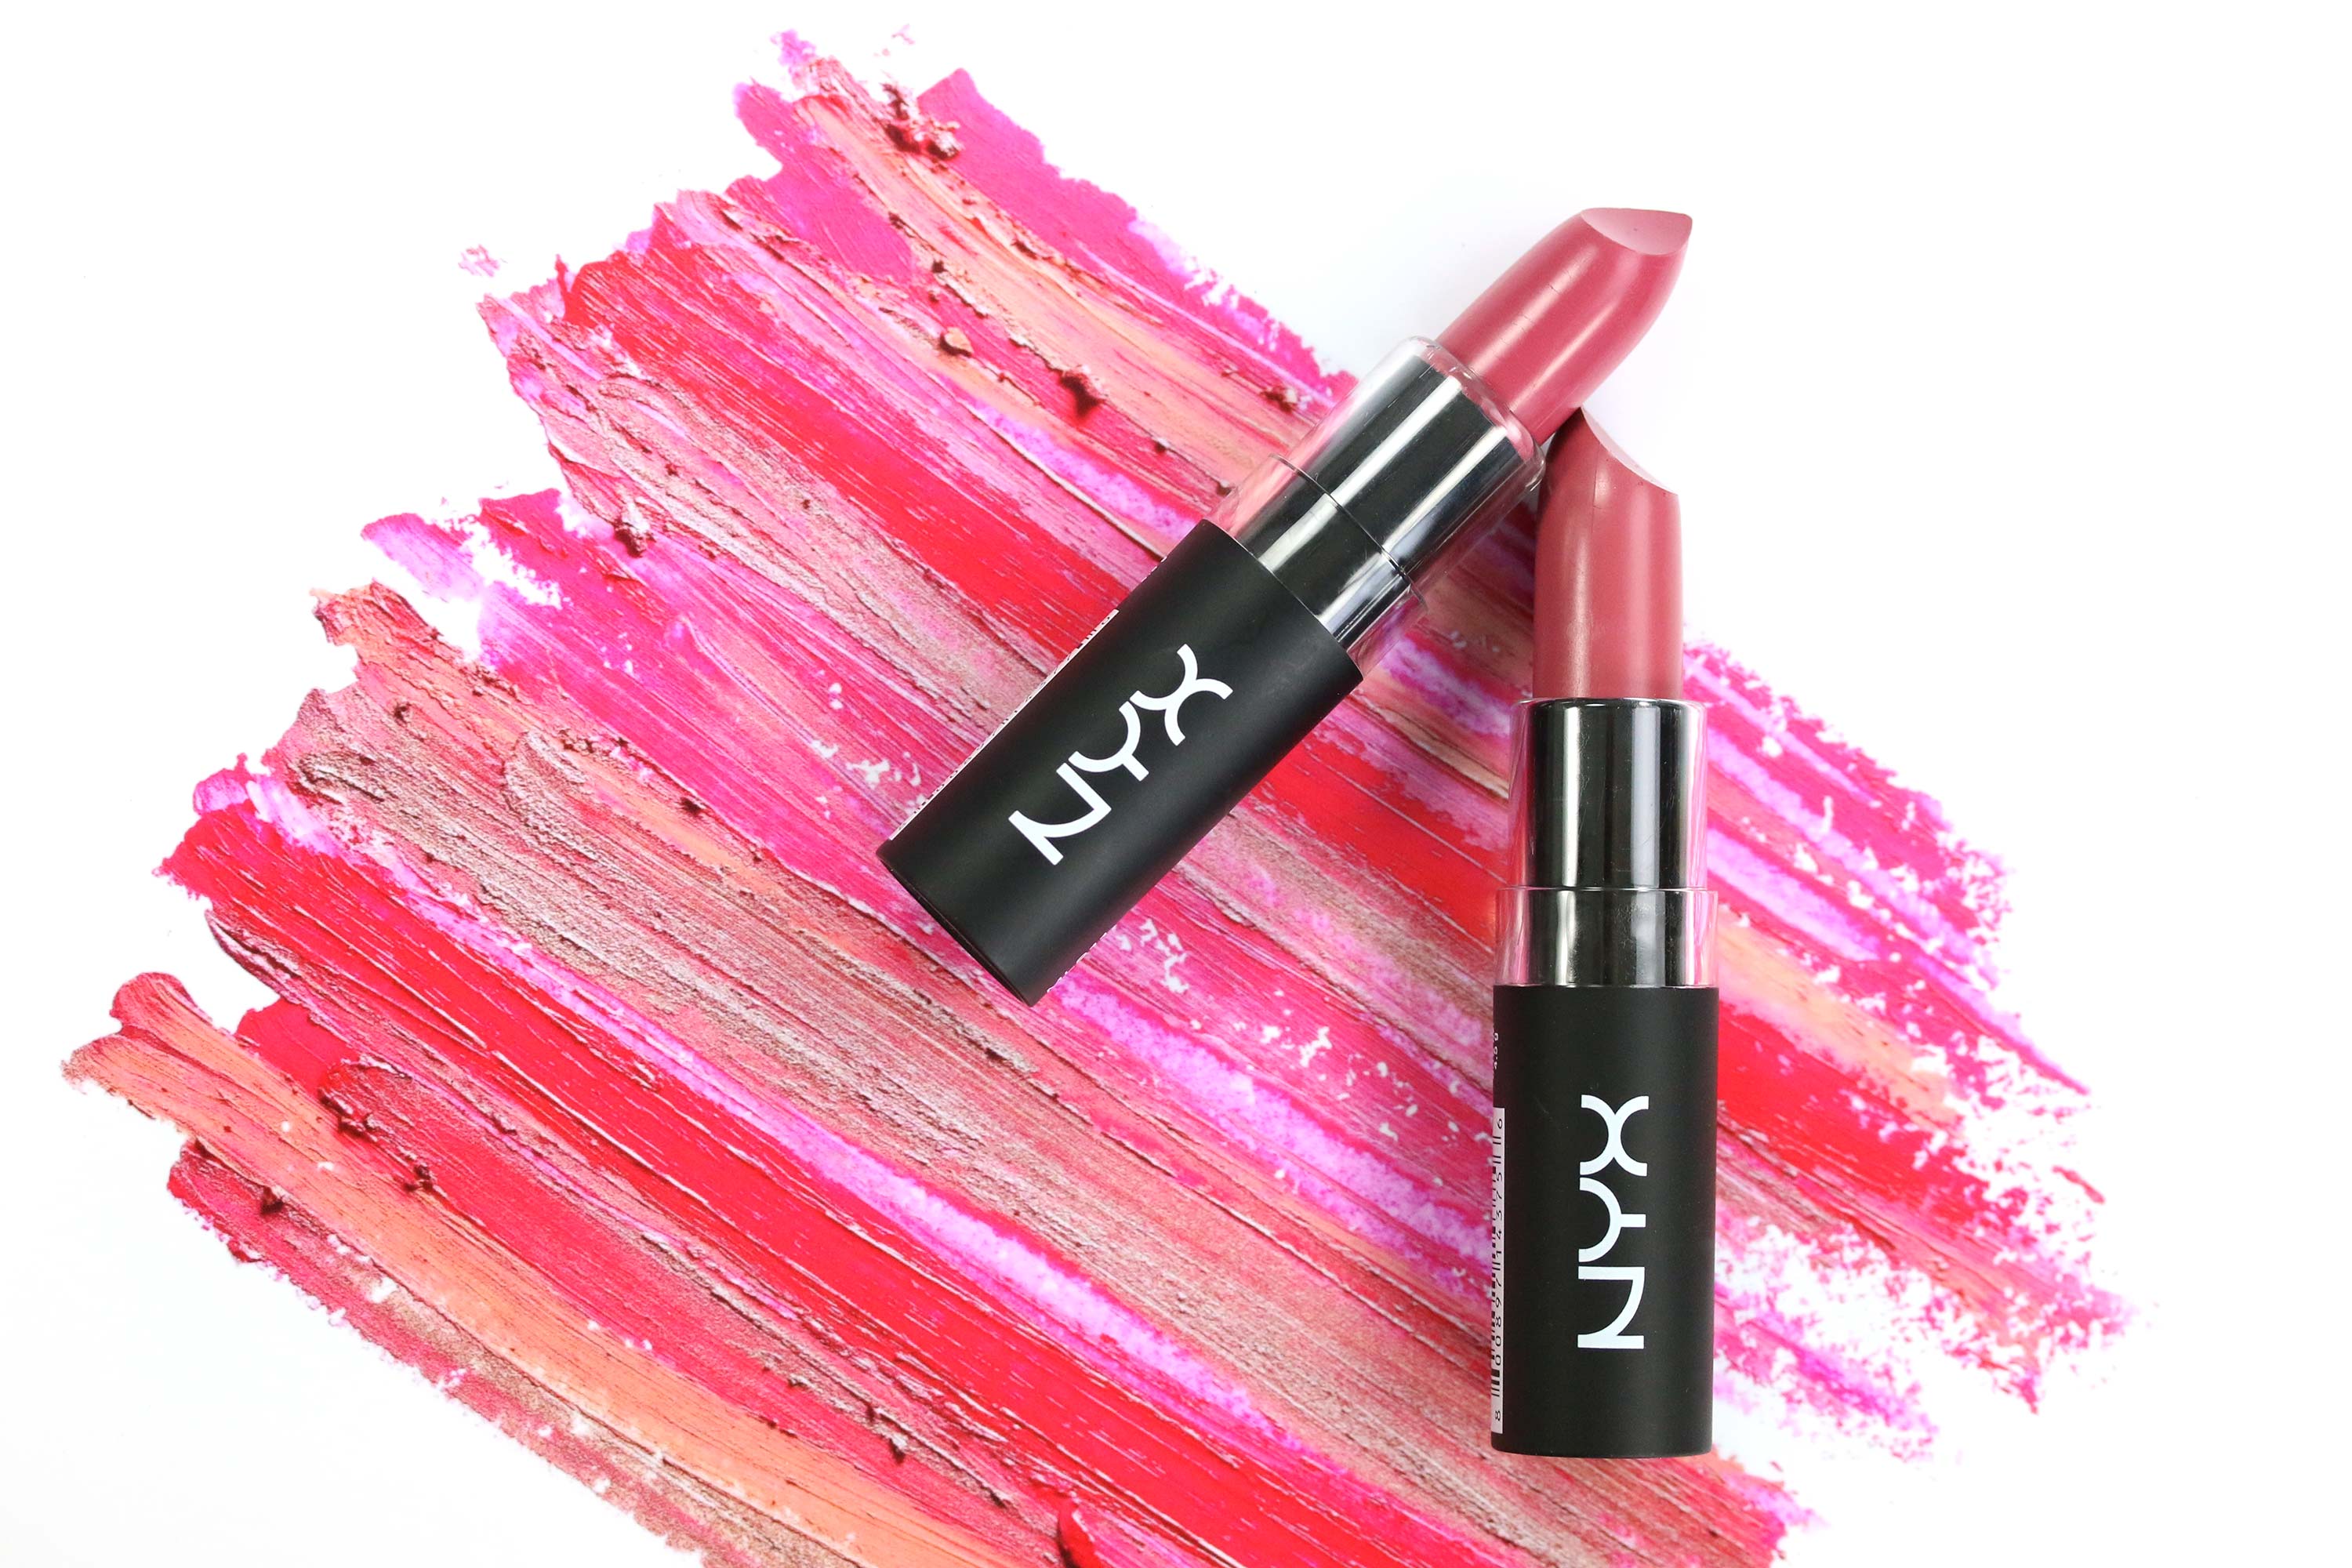 NYX Matte Lipstick in Street Cred Review & Swatches 